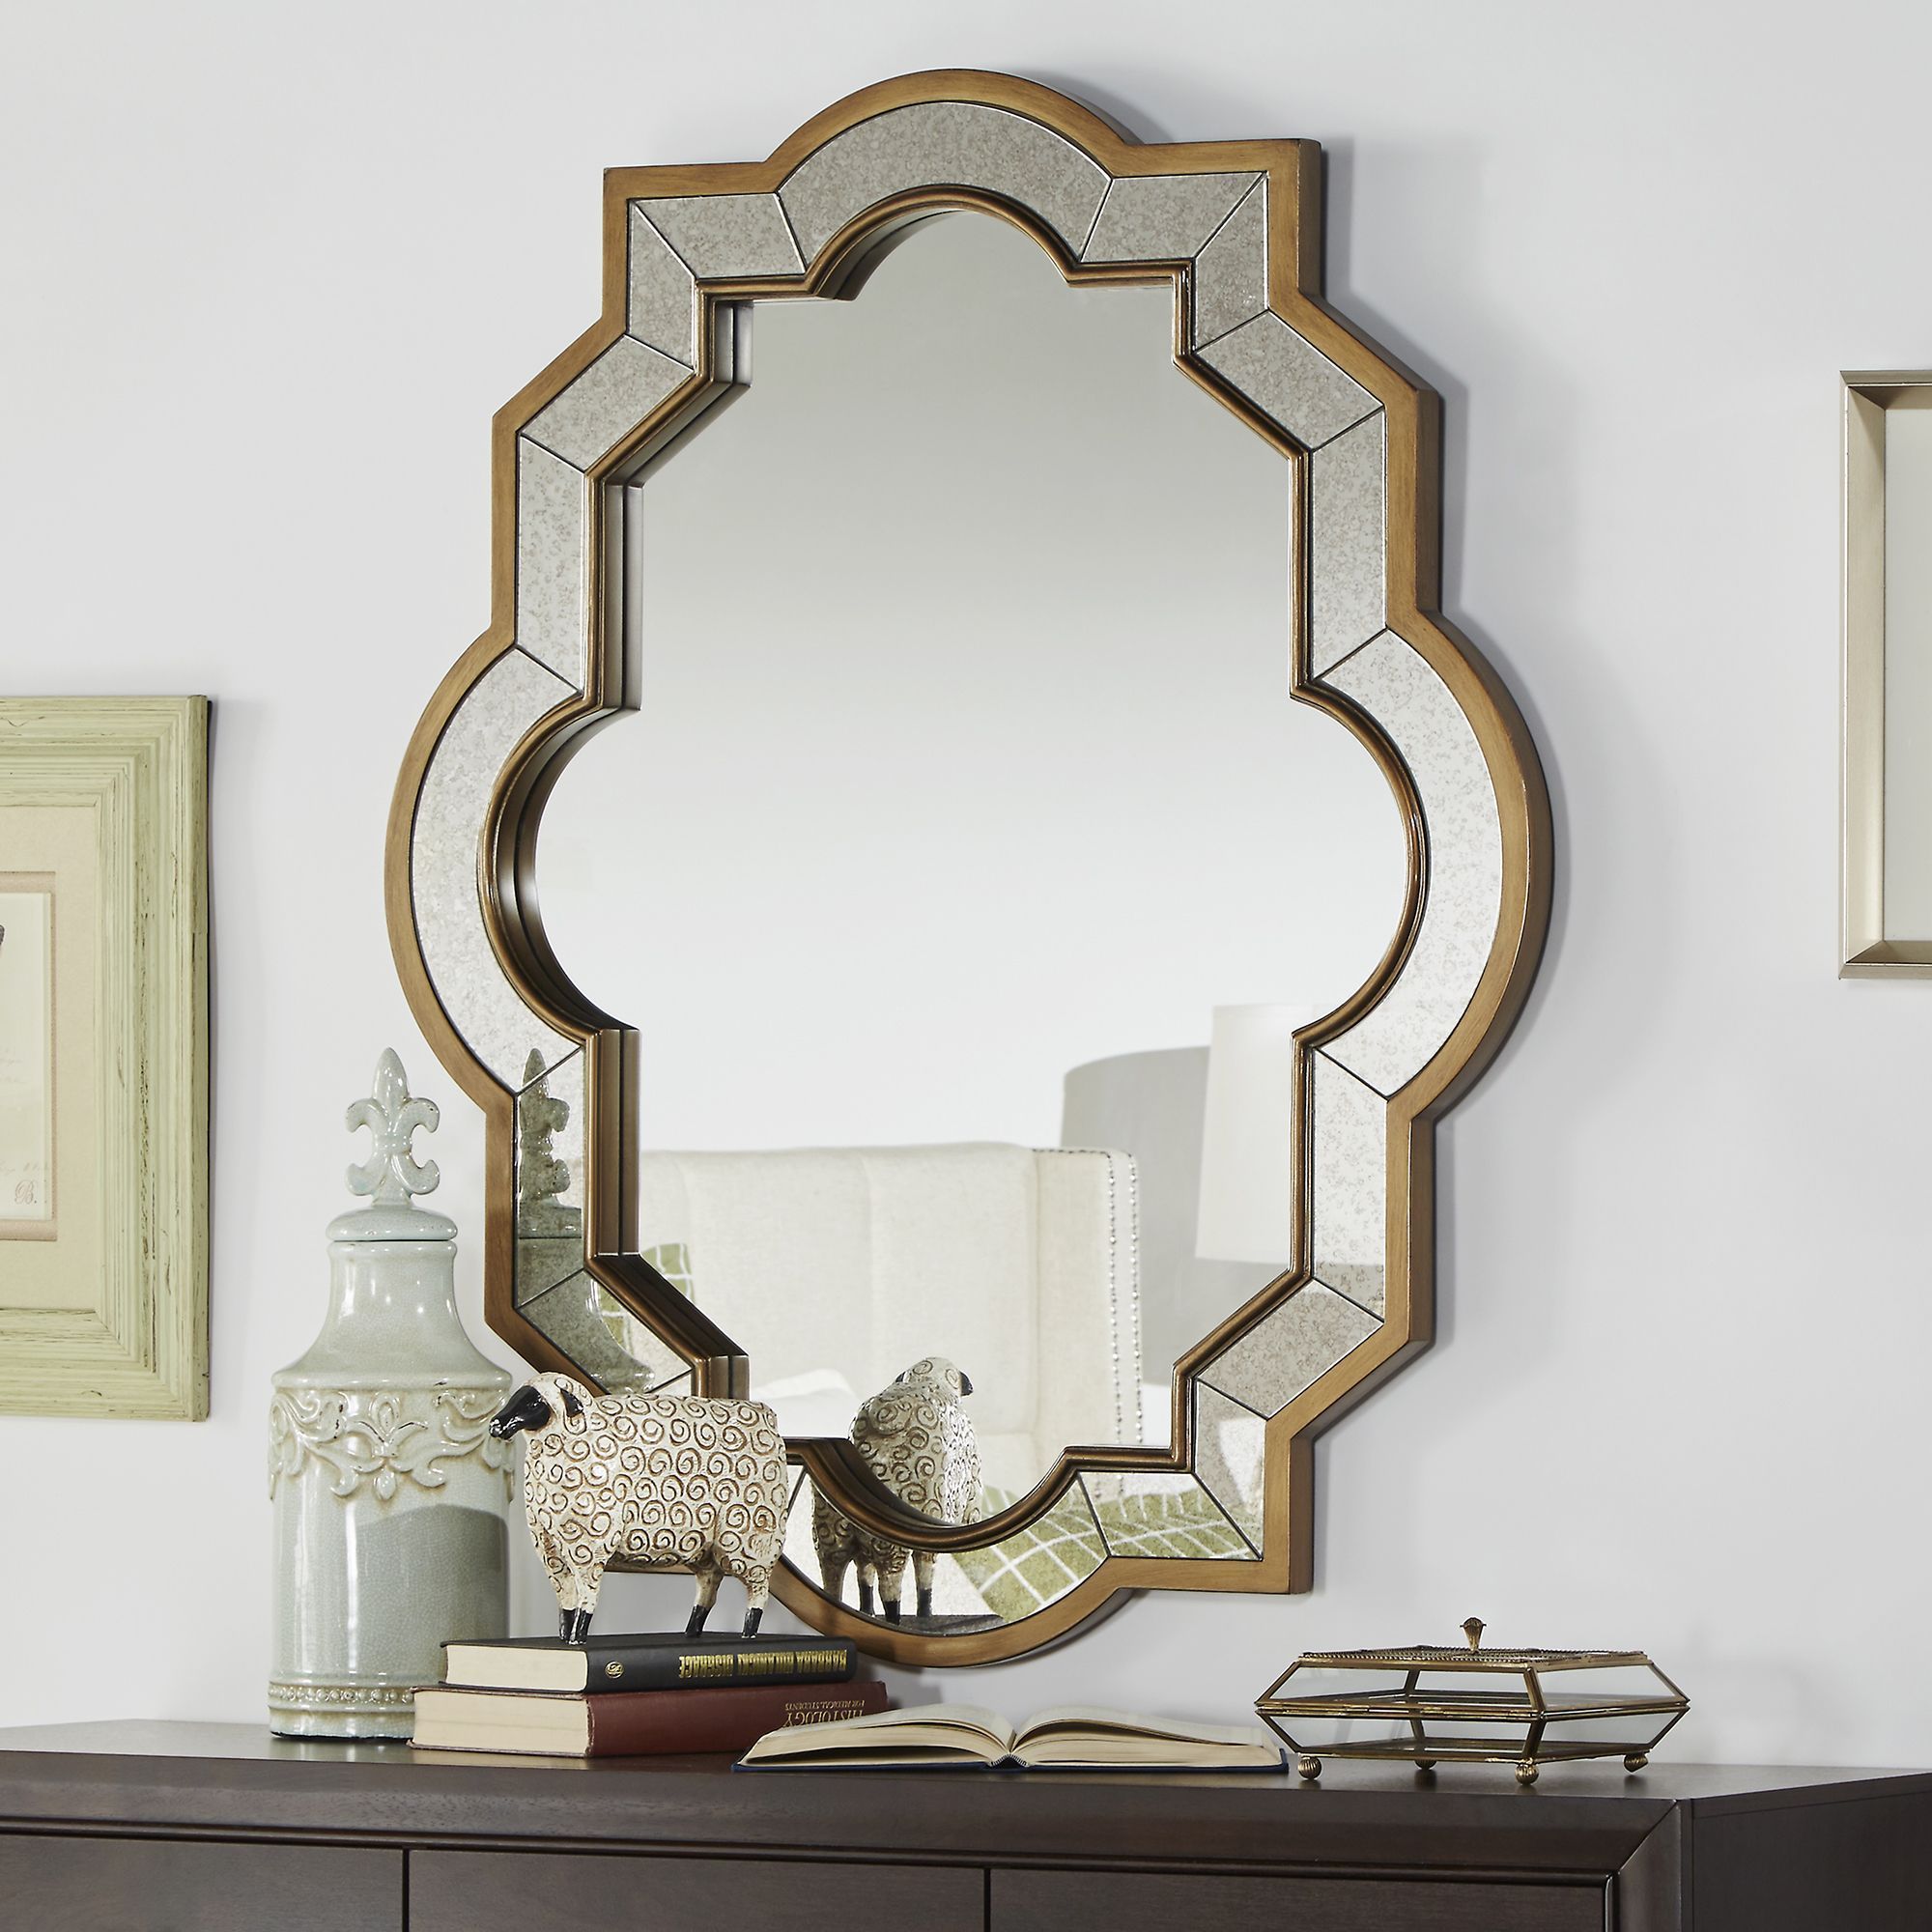 Mirrors | Mirror Wall, Decorative Bathroom Mirrors, Mirror Wall Decor With Regard To Booth Reclaimed Wall Mirrors Accent (View 4 of 15)